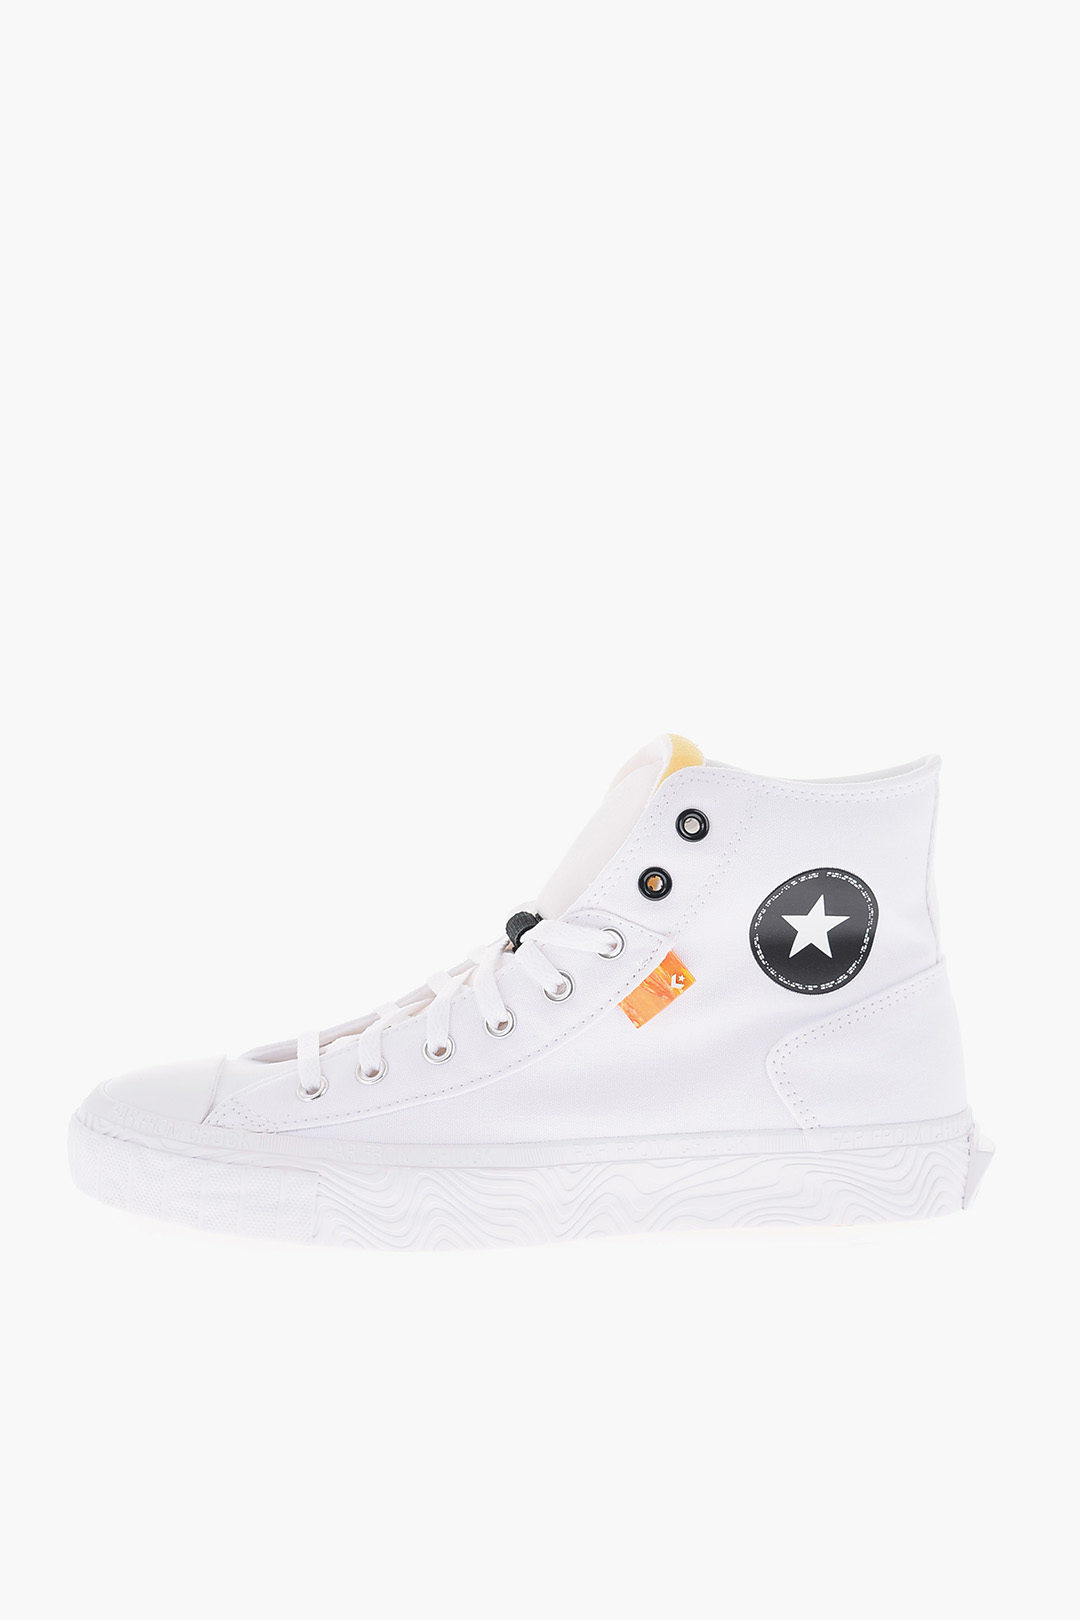 cruise Prijs schoenen Converse CHUCK TAYLOR ALT STAR High Padded Sneakers with Colorful Sole  unisex men women - Glamood Outlet